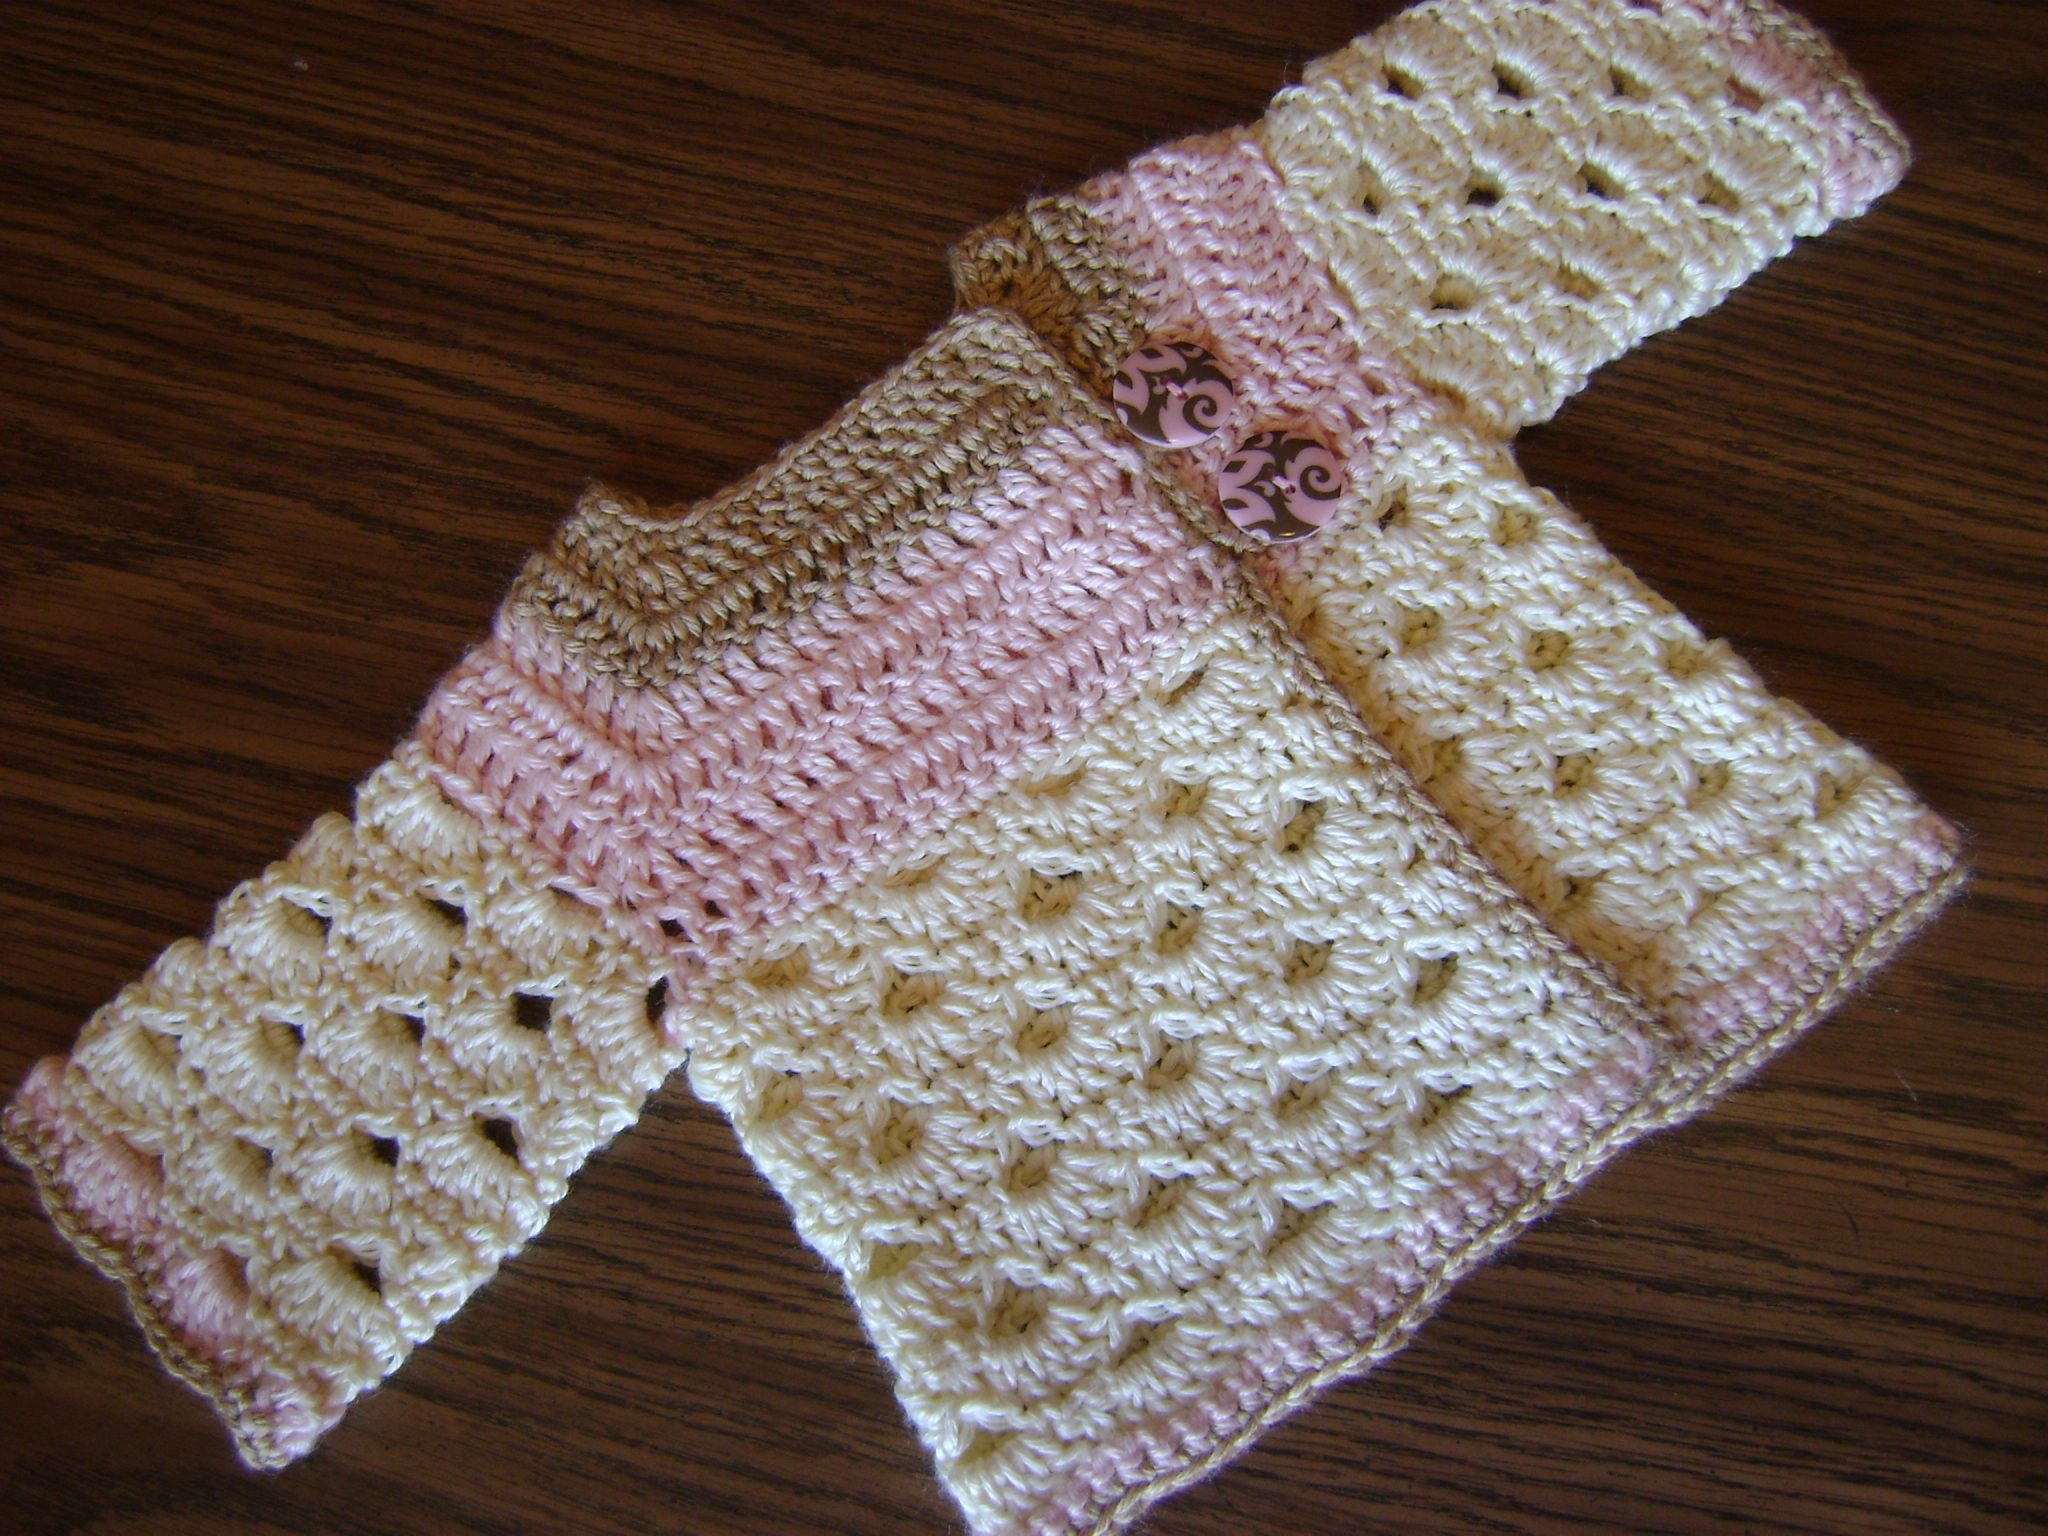 Crochet Baby Sweater Patterns Auntie Ms Abigails Ba Sweater Has A New Home